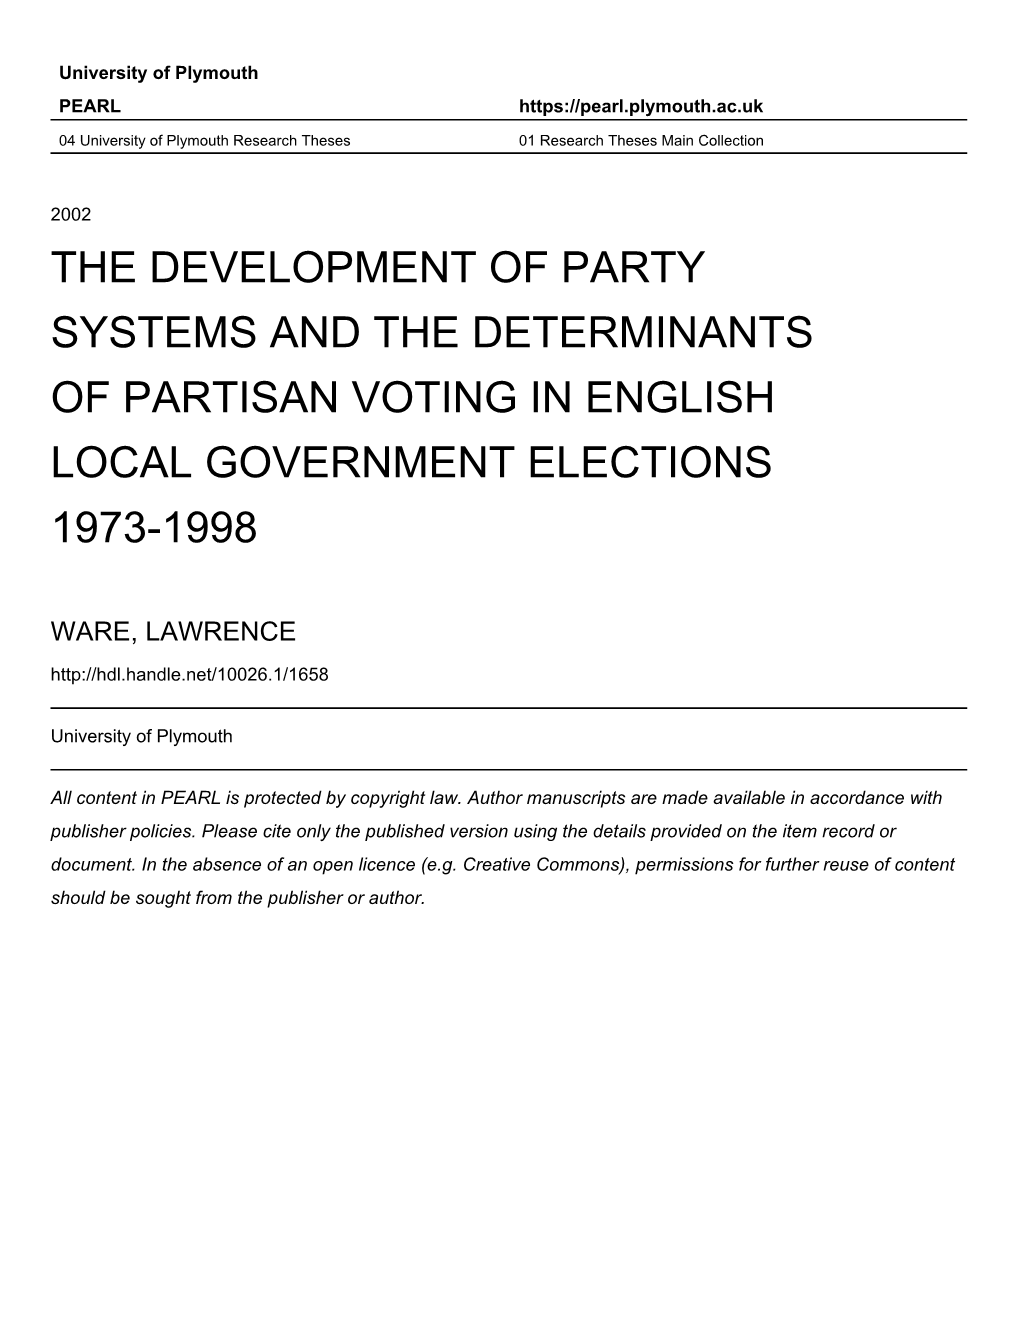 The Development of Party Systems and the Determinants of Partisan Voting in English Local Government Elections 1973-1998